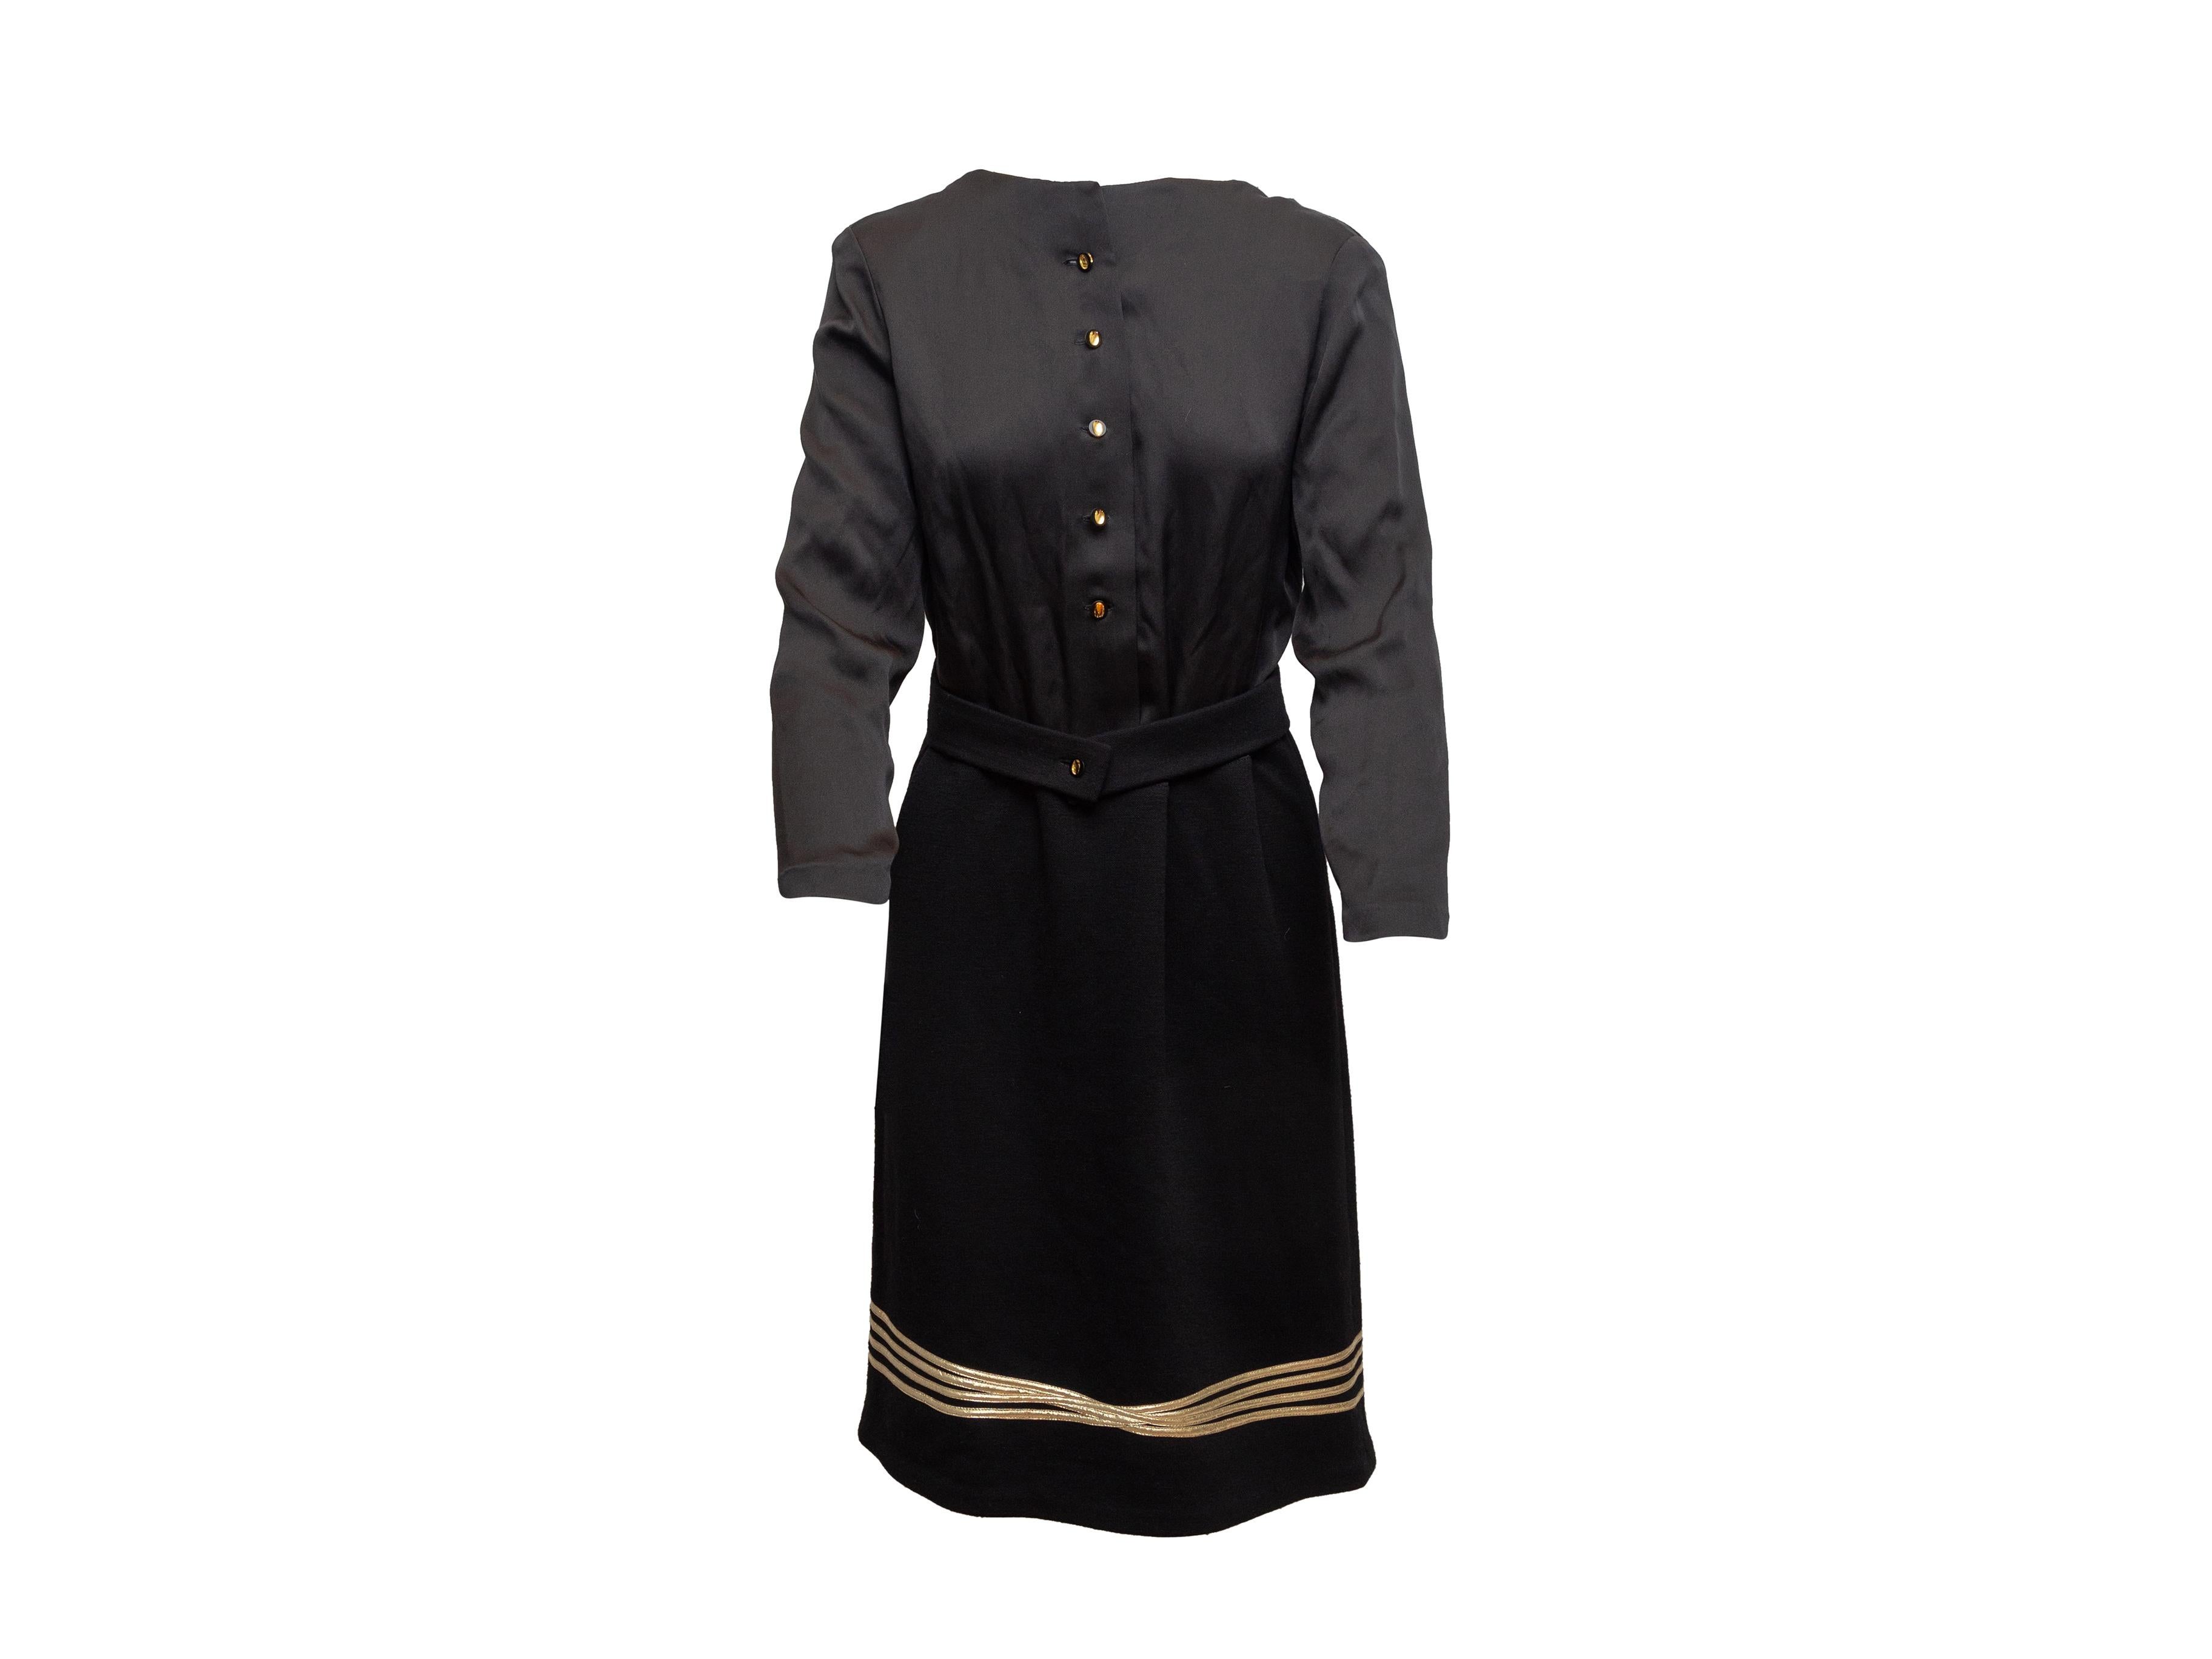 Product details: Vintage black and gold long sleeve dress by Geoffrey Beene. Crew neck. Belt accent at waist. Button closures at front. 36